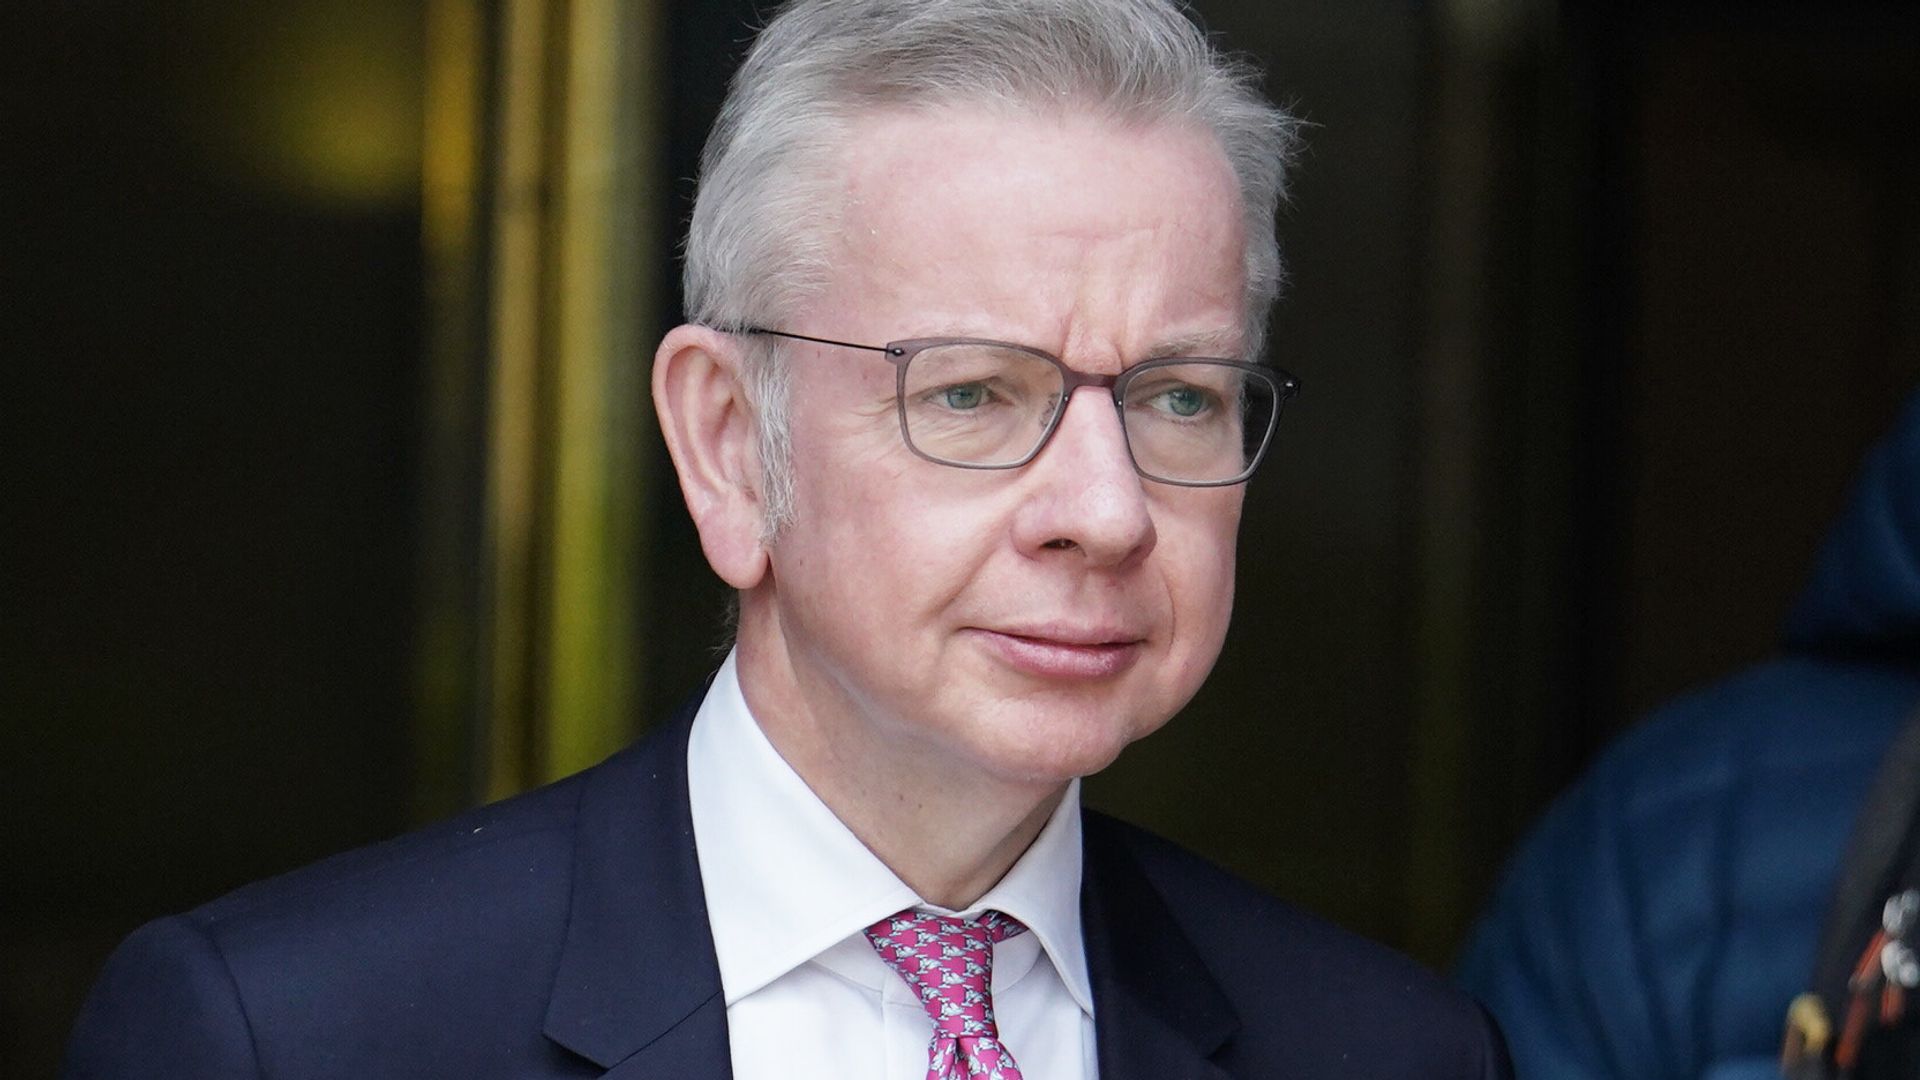 Pension funds brace for £30bn hit from Gove leasehold reforms